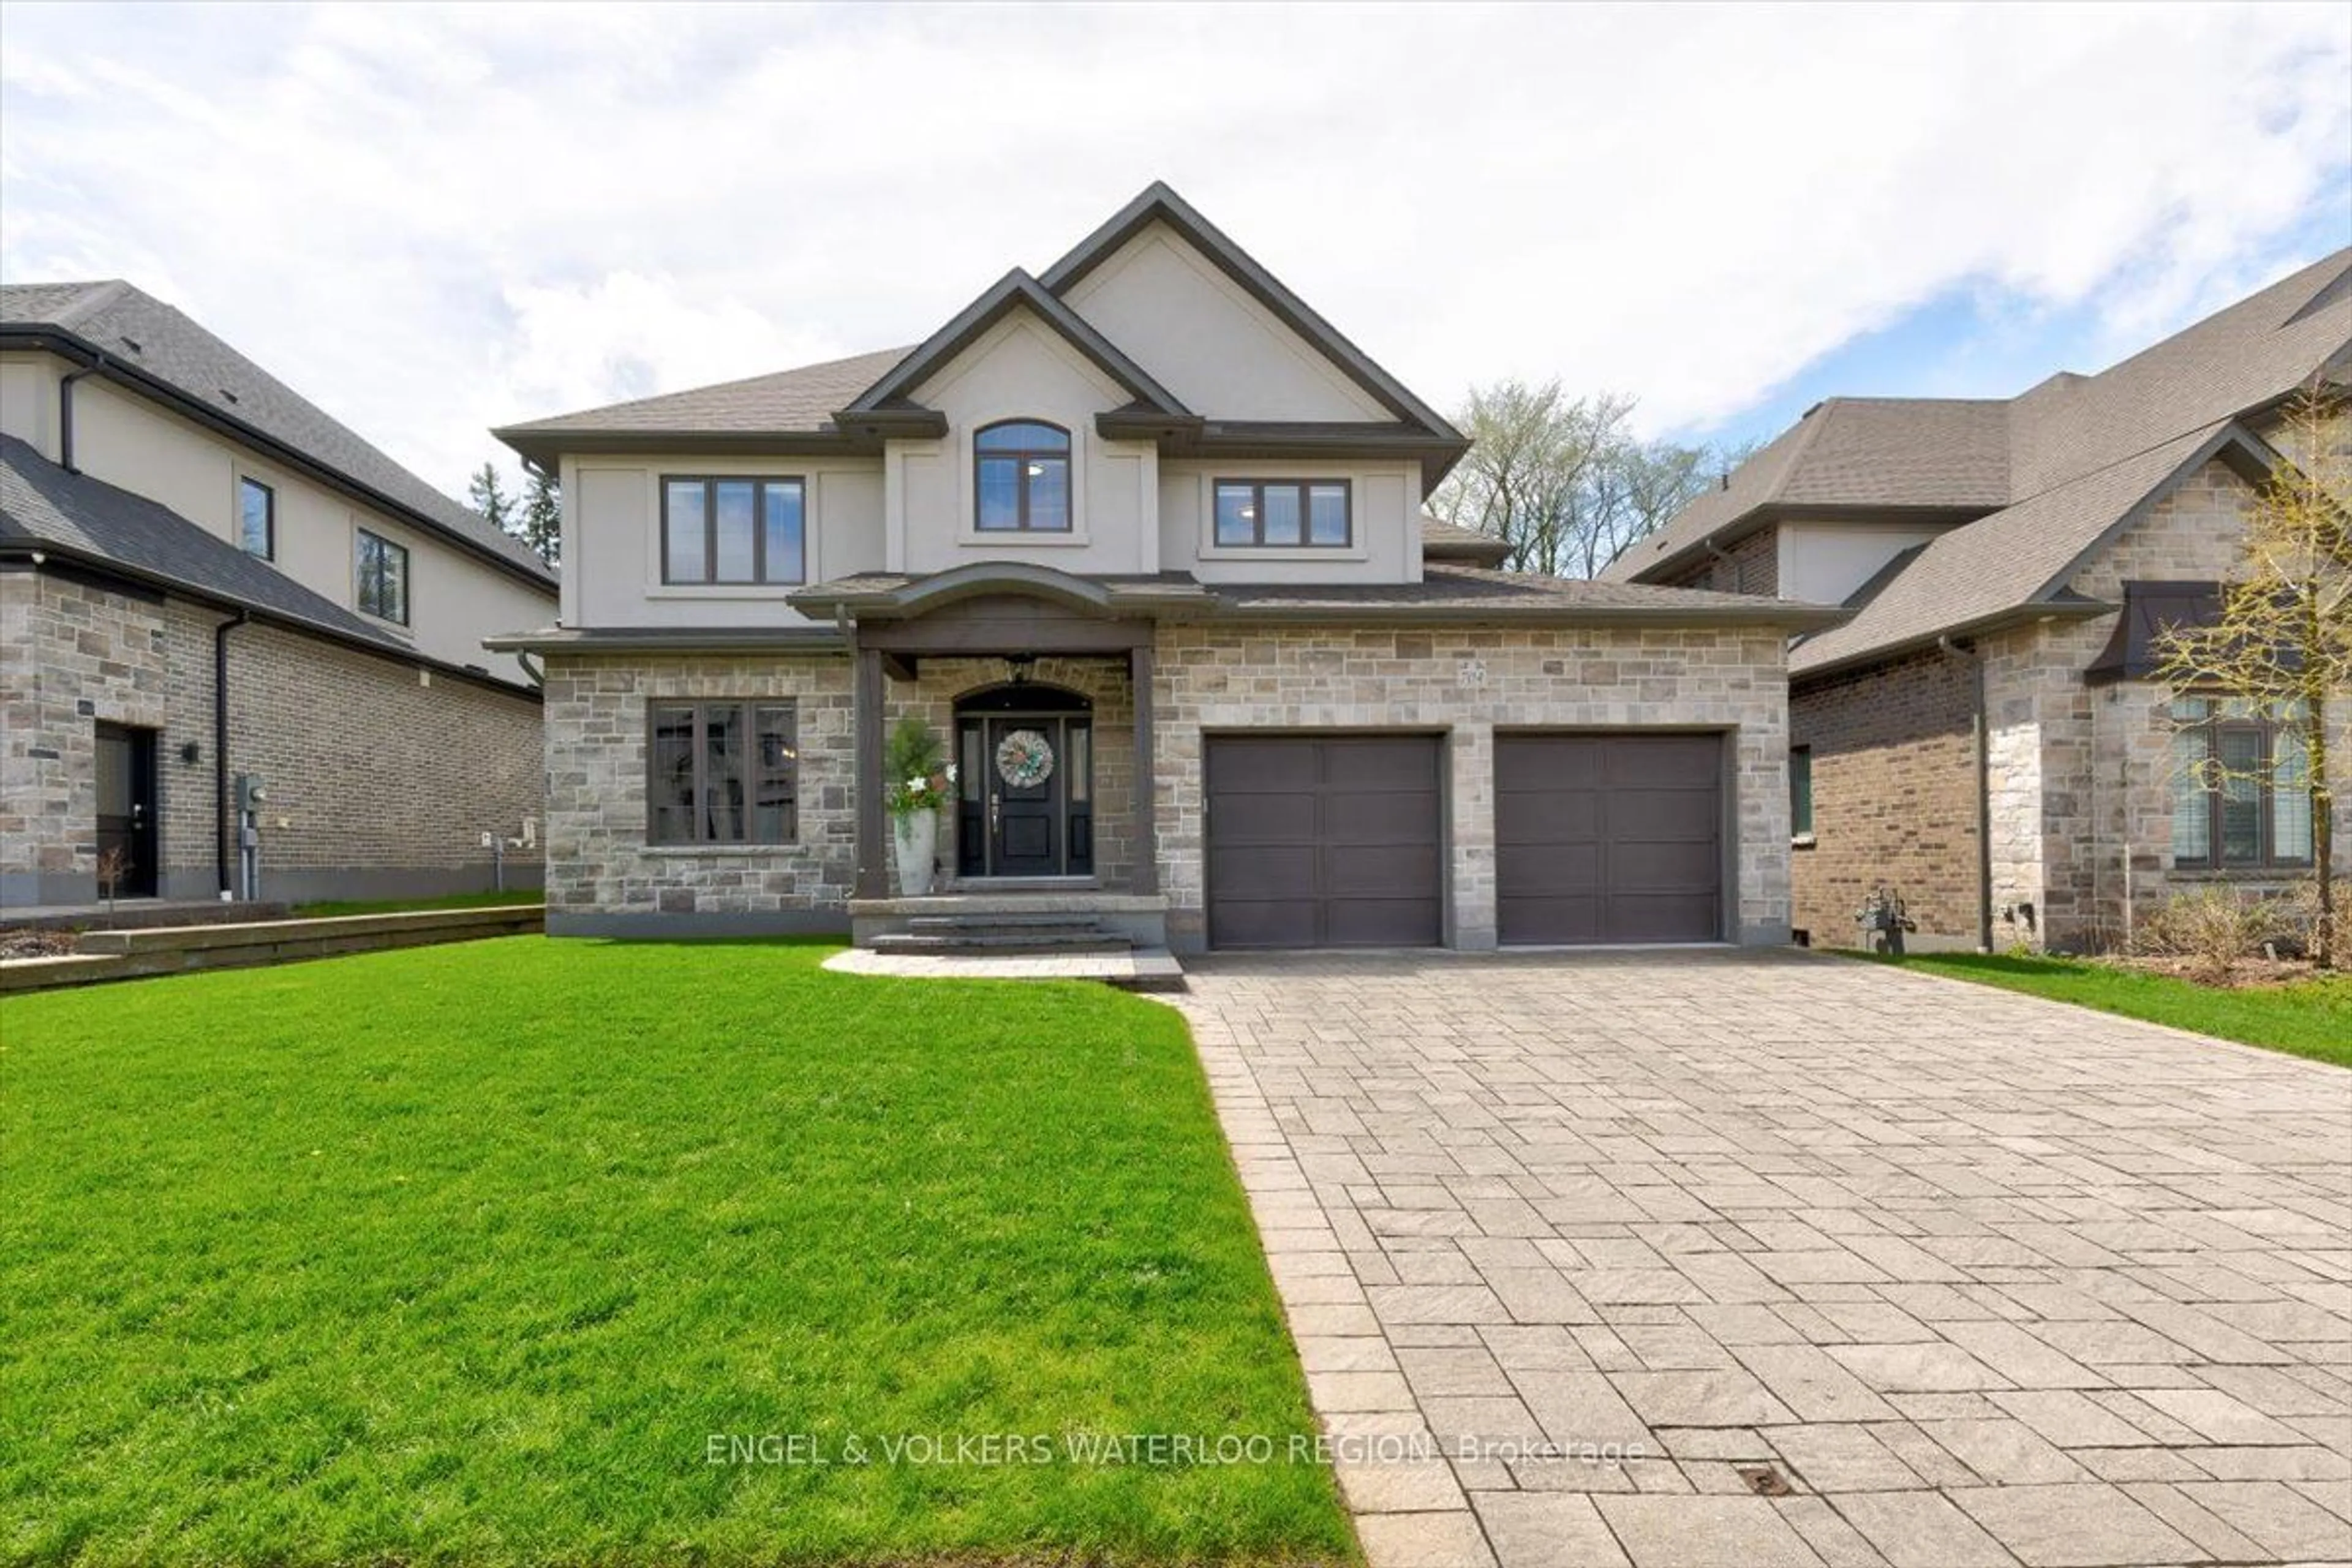 Home with brick exterior material for 704 Meadowsweet Ave, Waterloo Ontario N2V 0A6